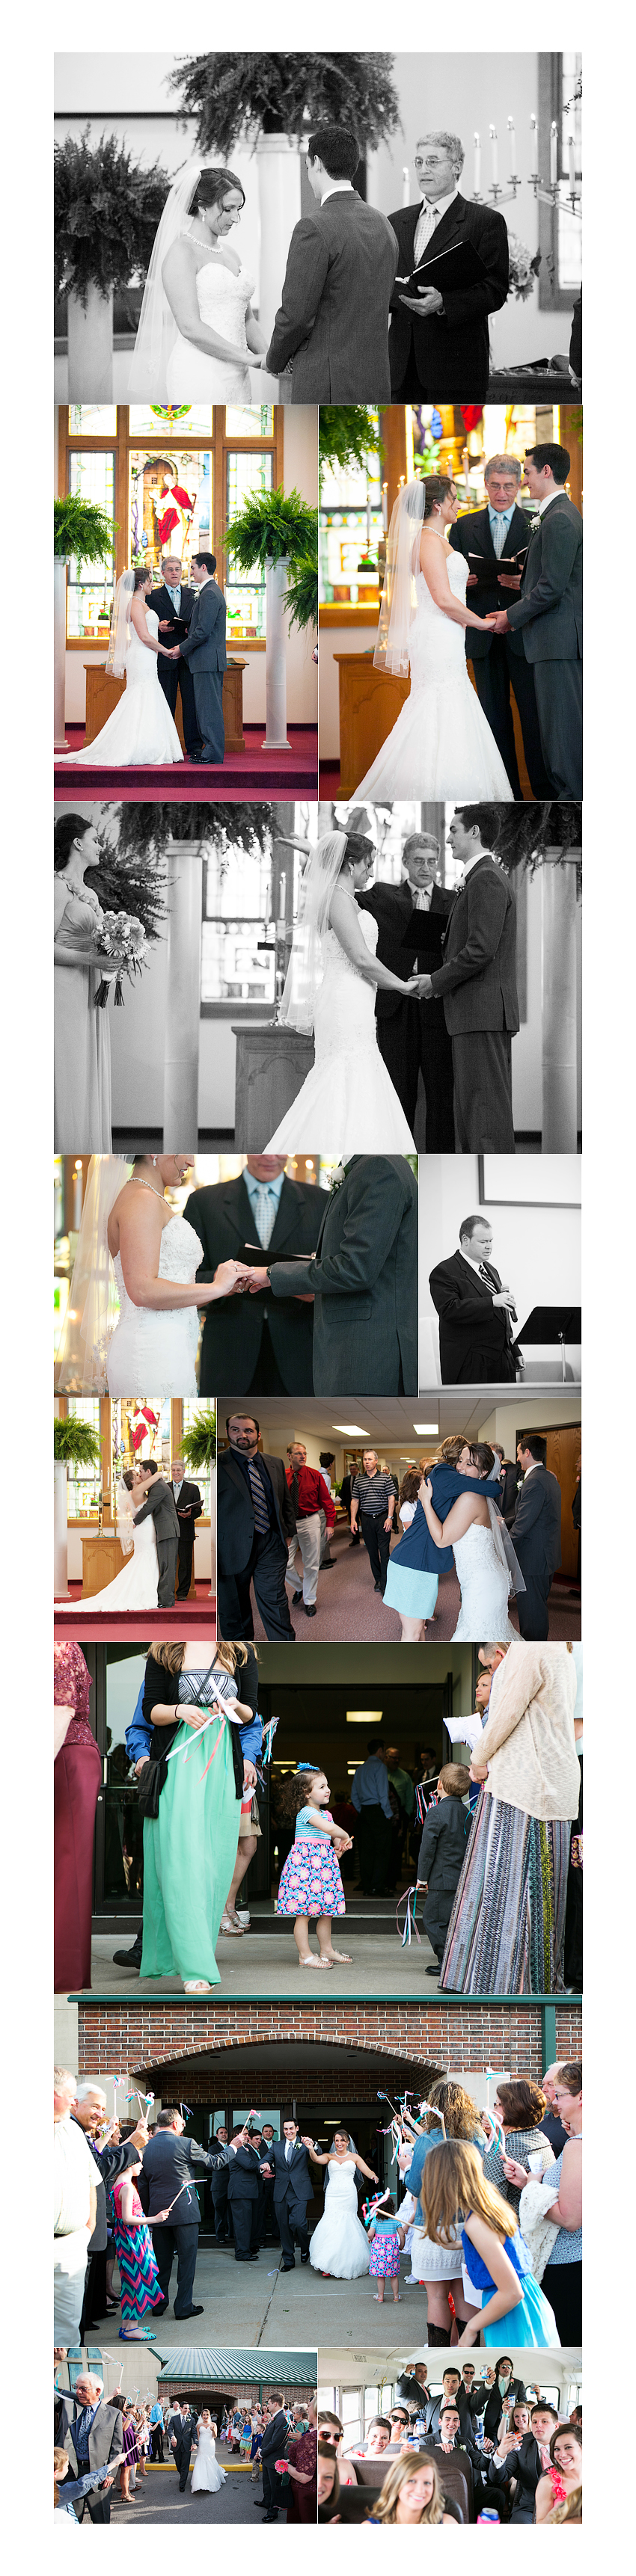 ceremony and leaving images